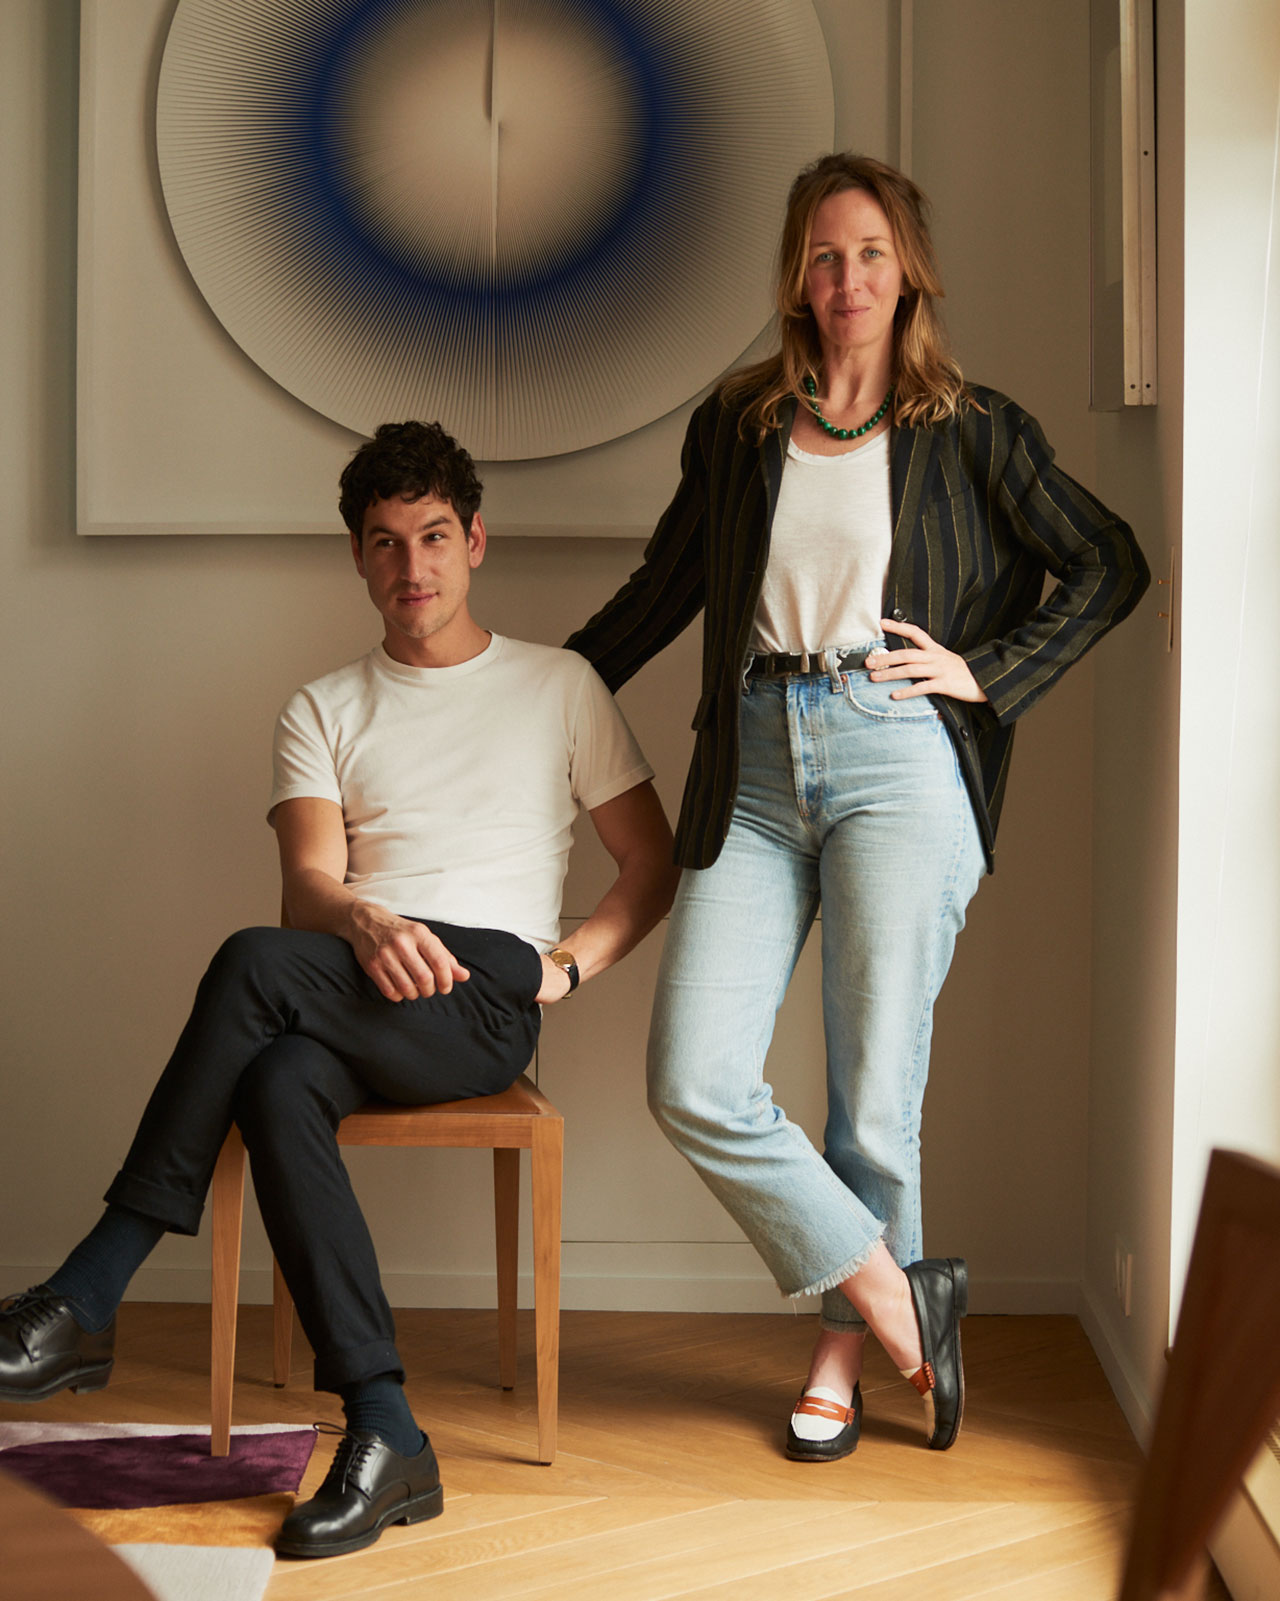 Samantha Hauvette and Lucas Madani, founders of Hauvette &amp; Madani.
Photography by Francois Coquerel.